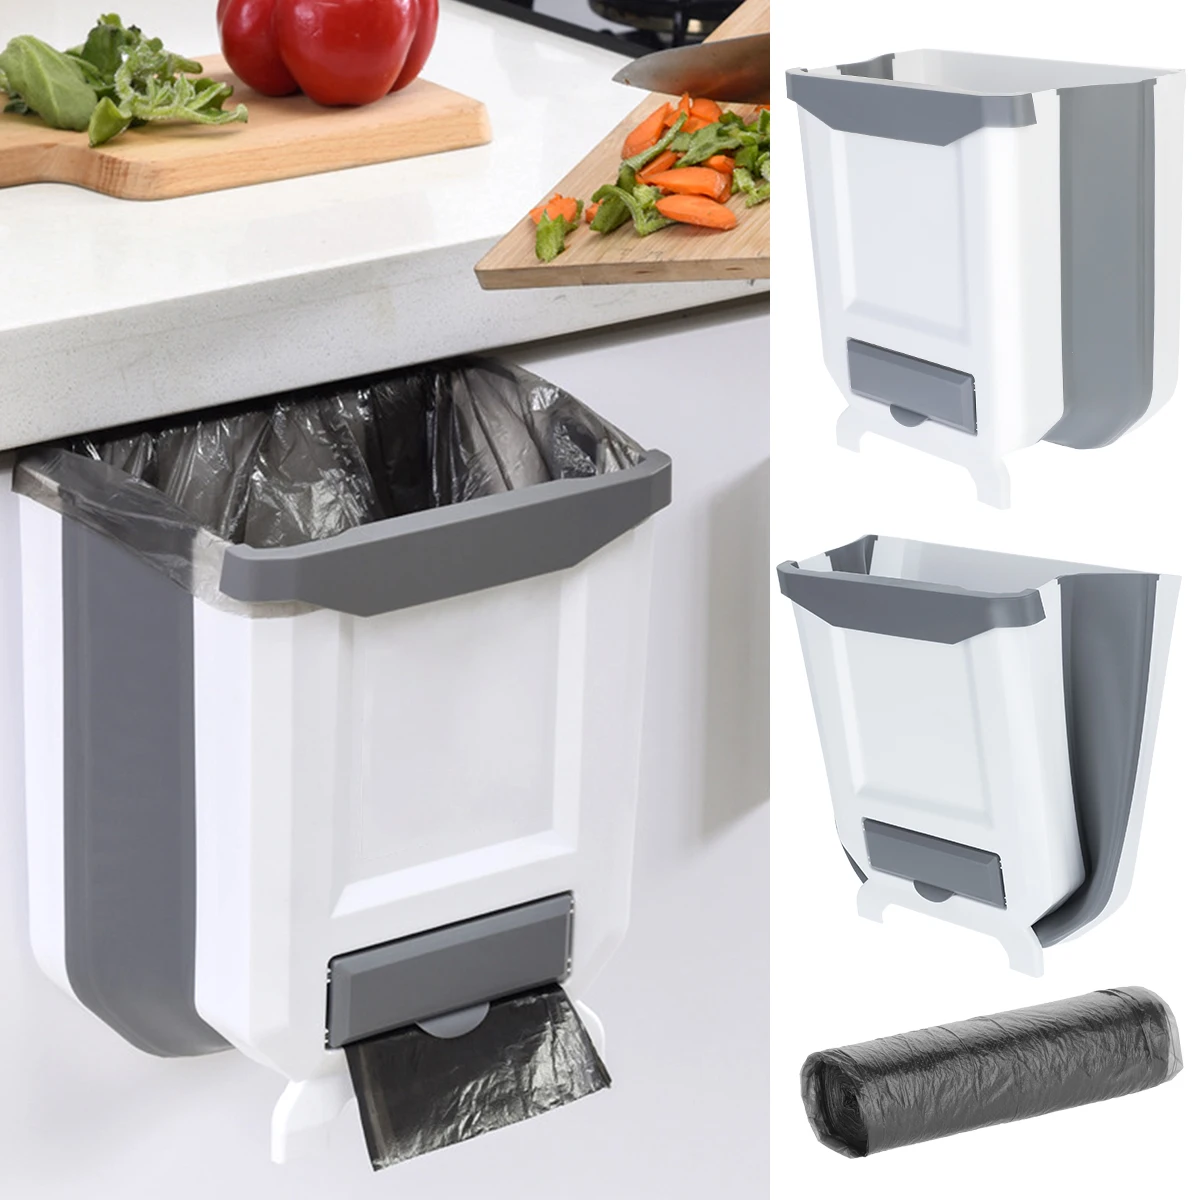 Hanging Trash Can Kitchen Waste Bin Cabinet Collapsible Mini Garbage Cans for Car Bathroom Office Bedroom Camping 